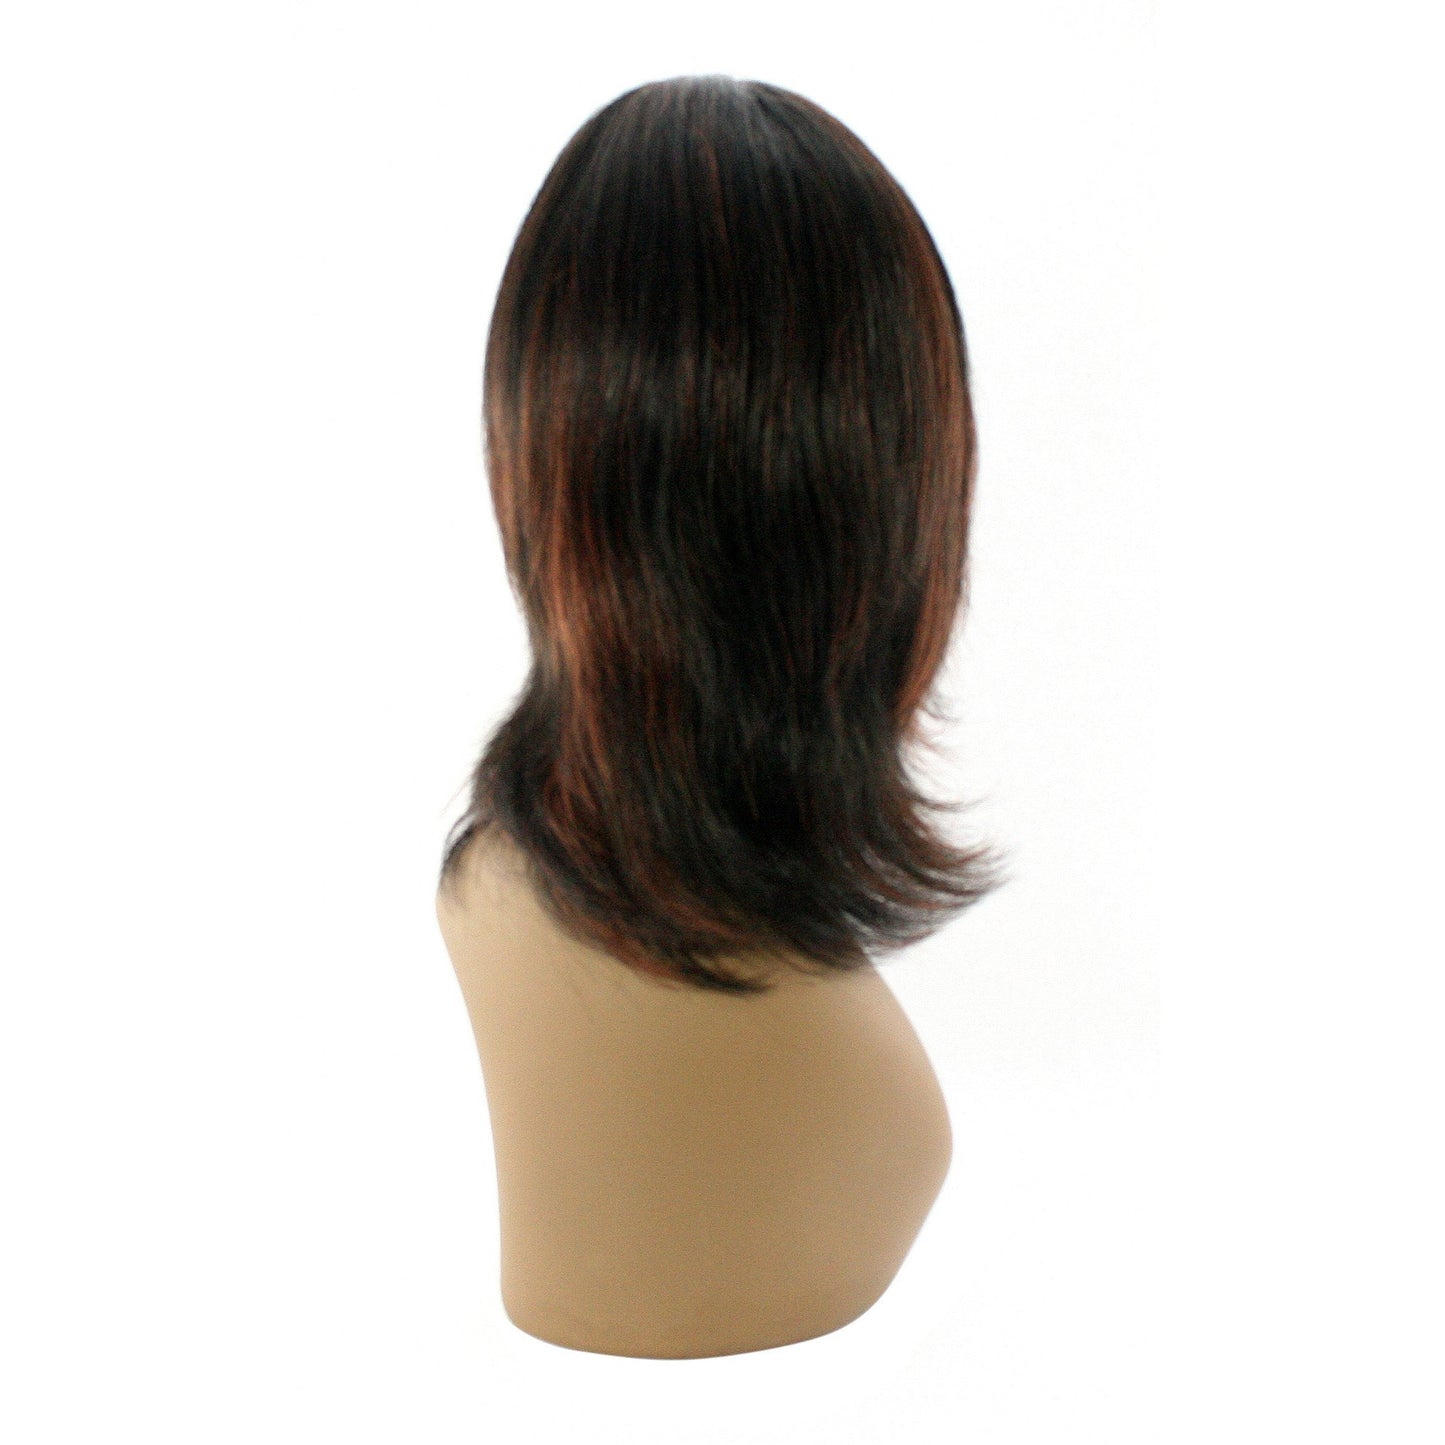 Unique's 100% Human Hair Full Wig / Style "X" - BeautyGiant USA